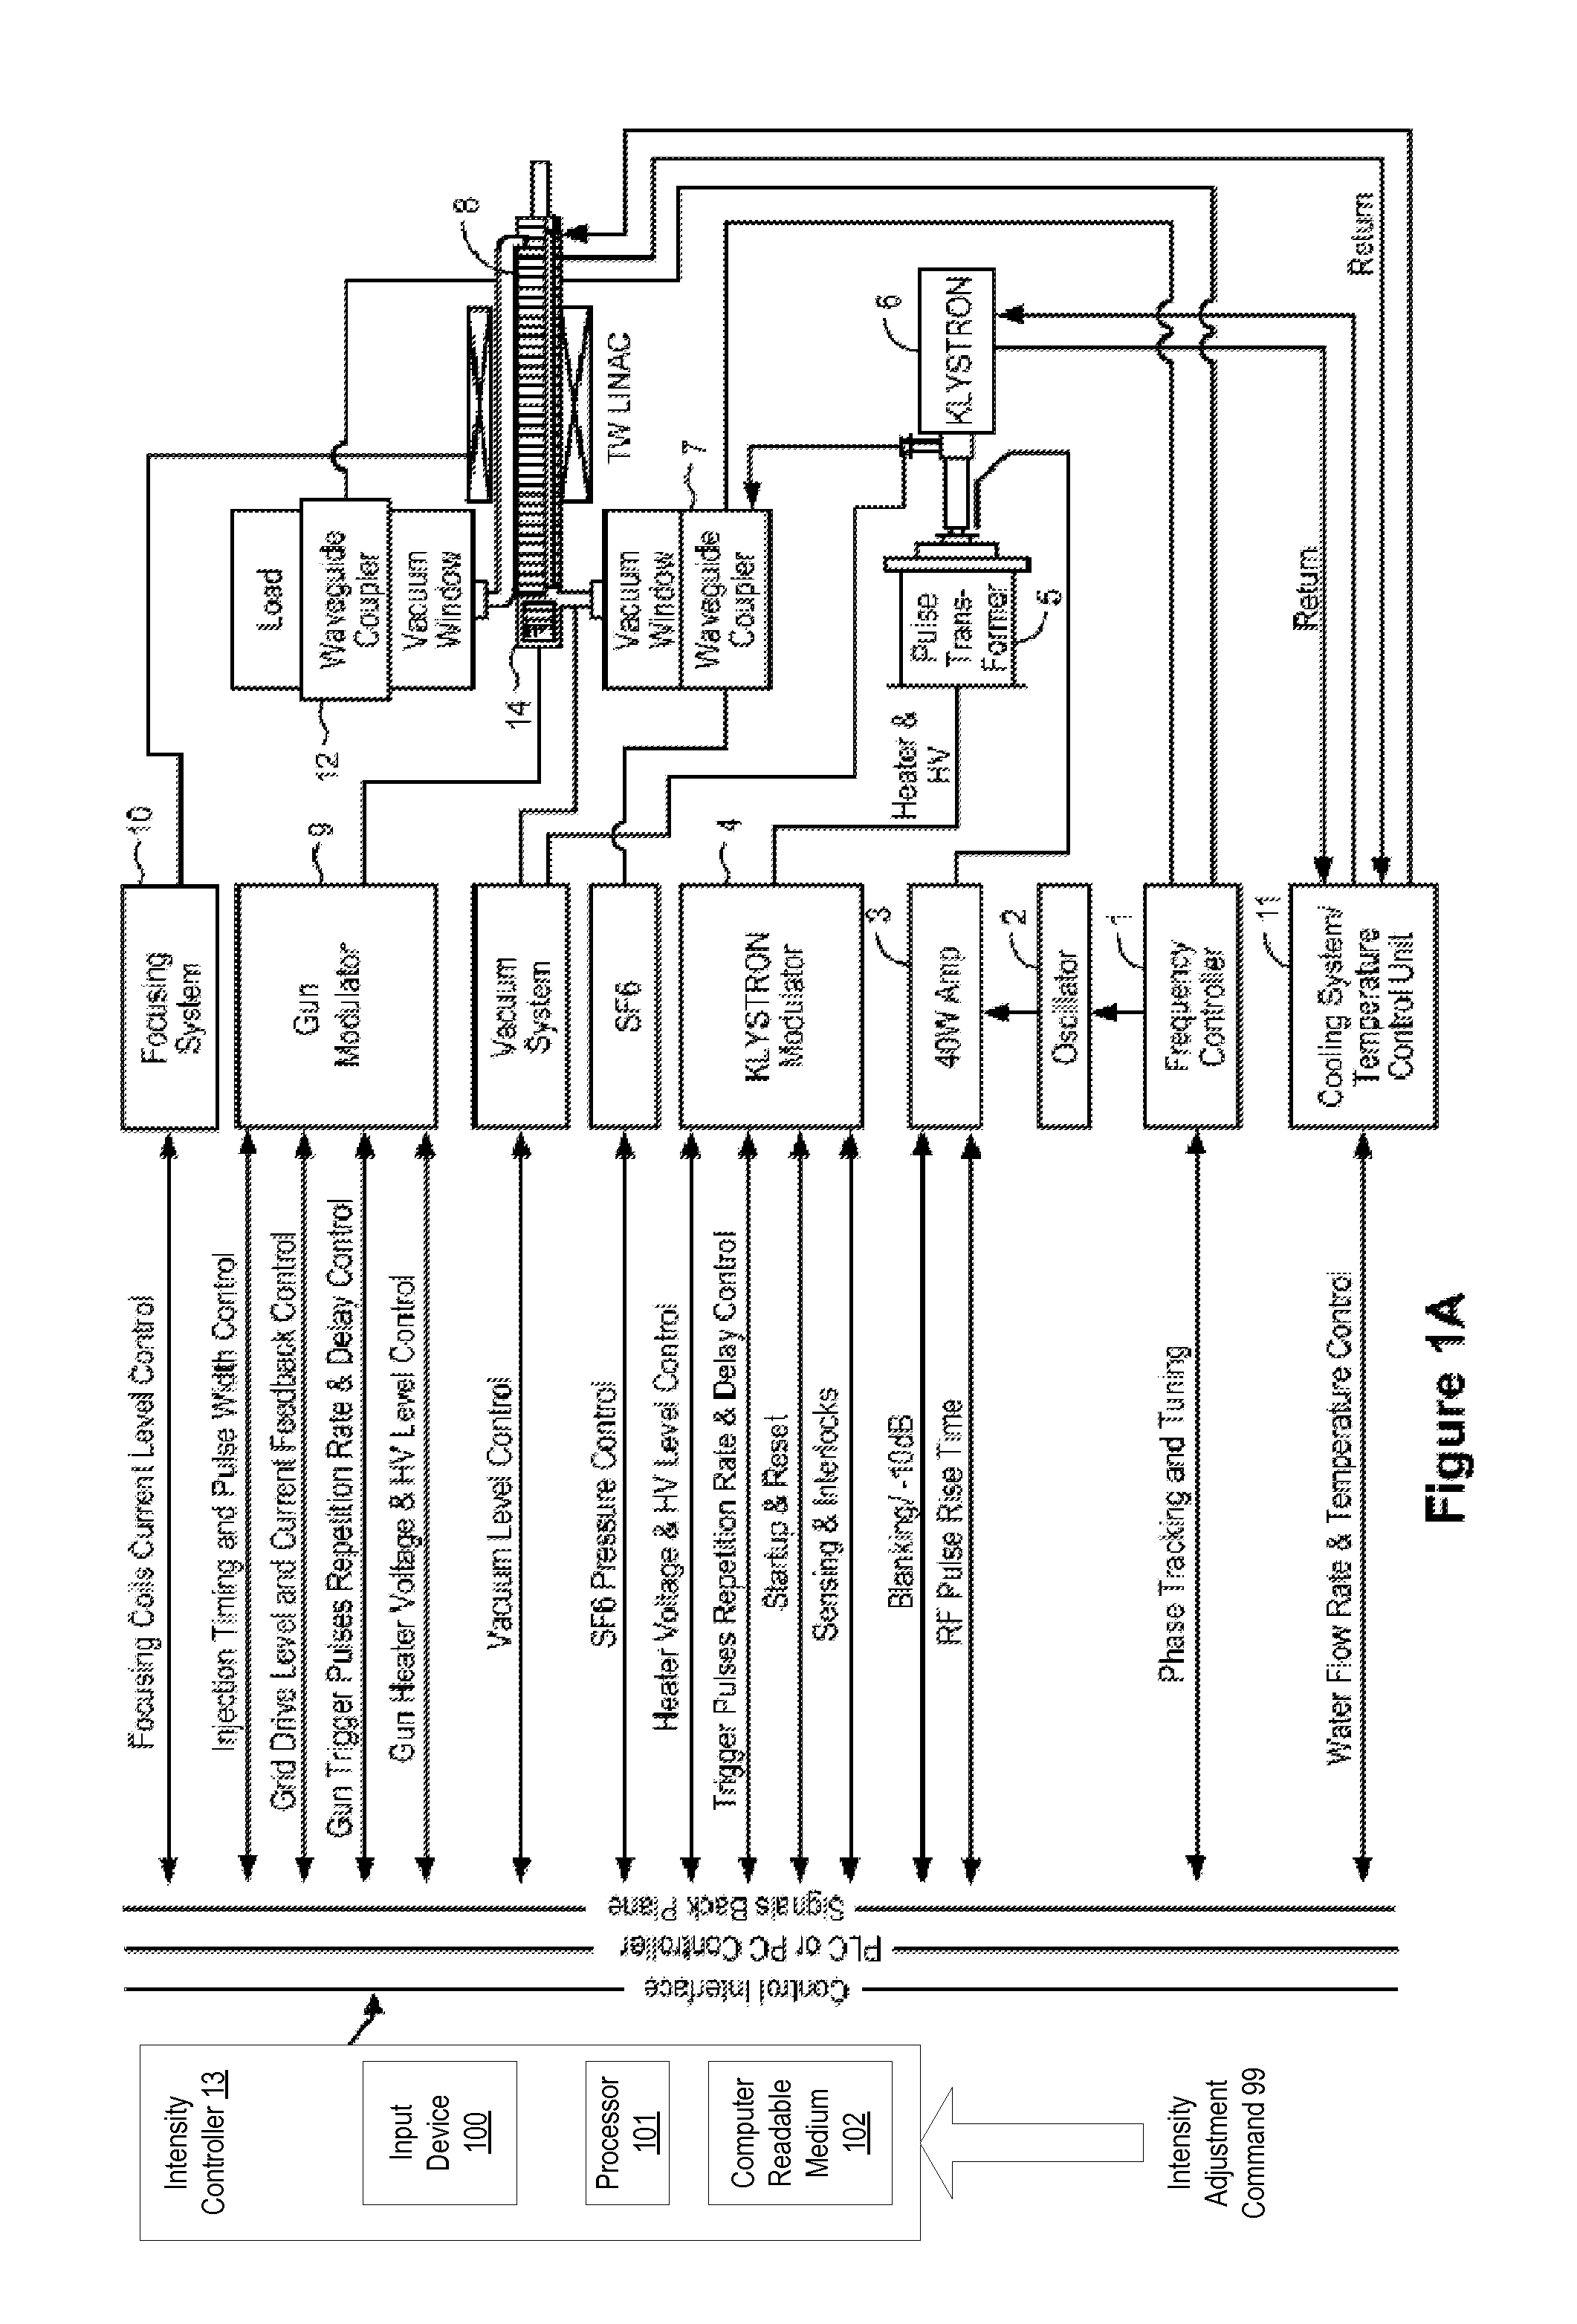 Traveling wave linear accelerator based x-ray source using pulse width to modulate pulse-to-pulse dosage